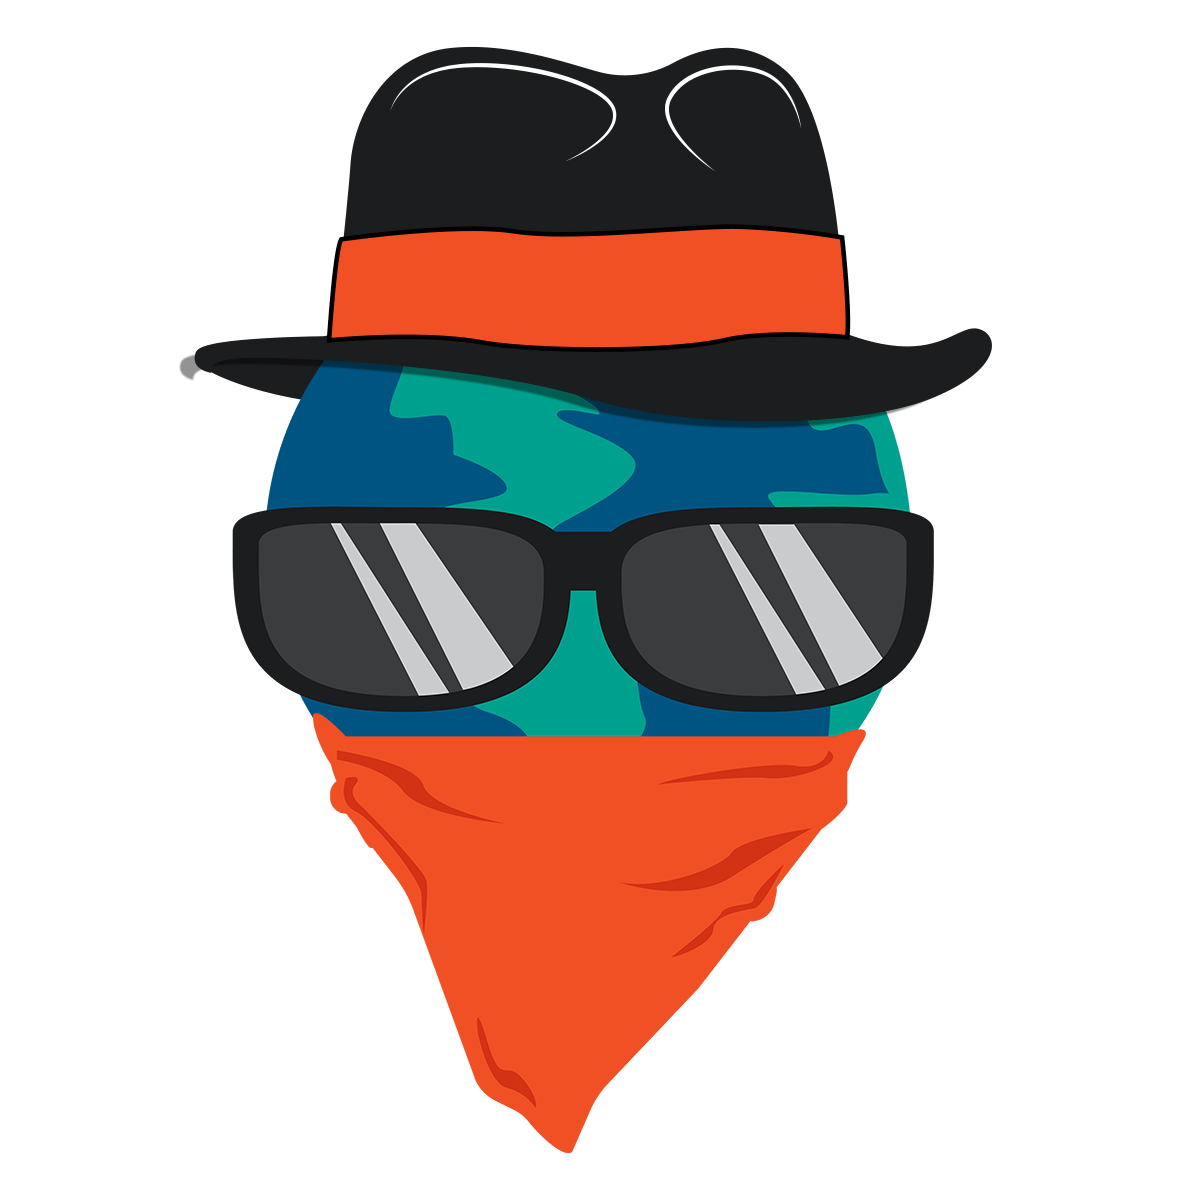 The Climate Bandit